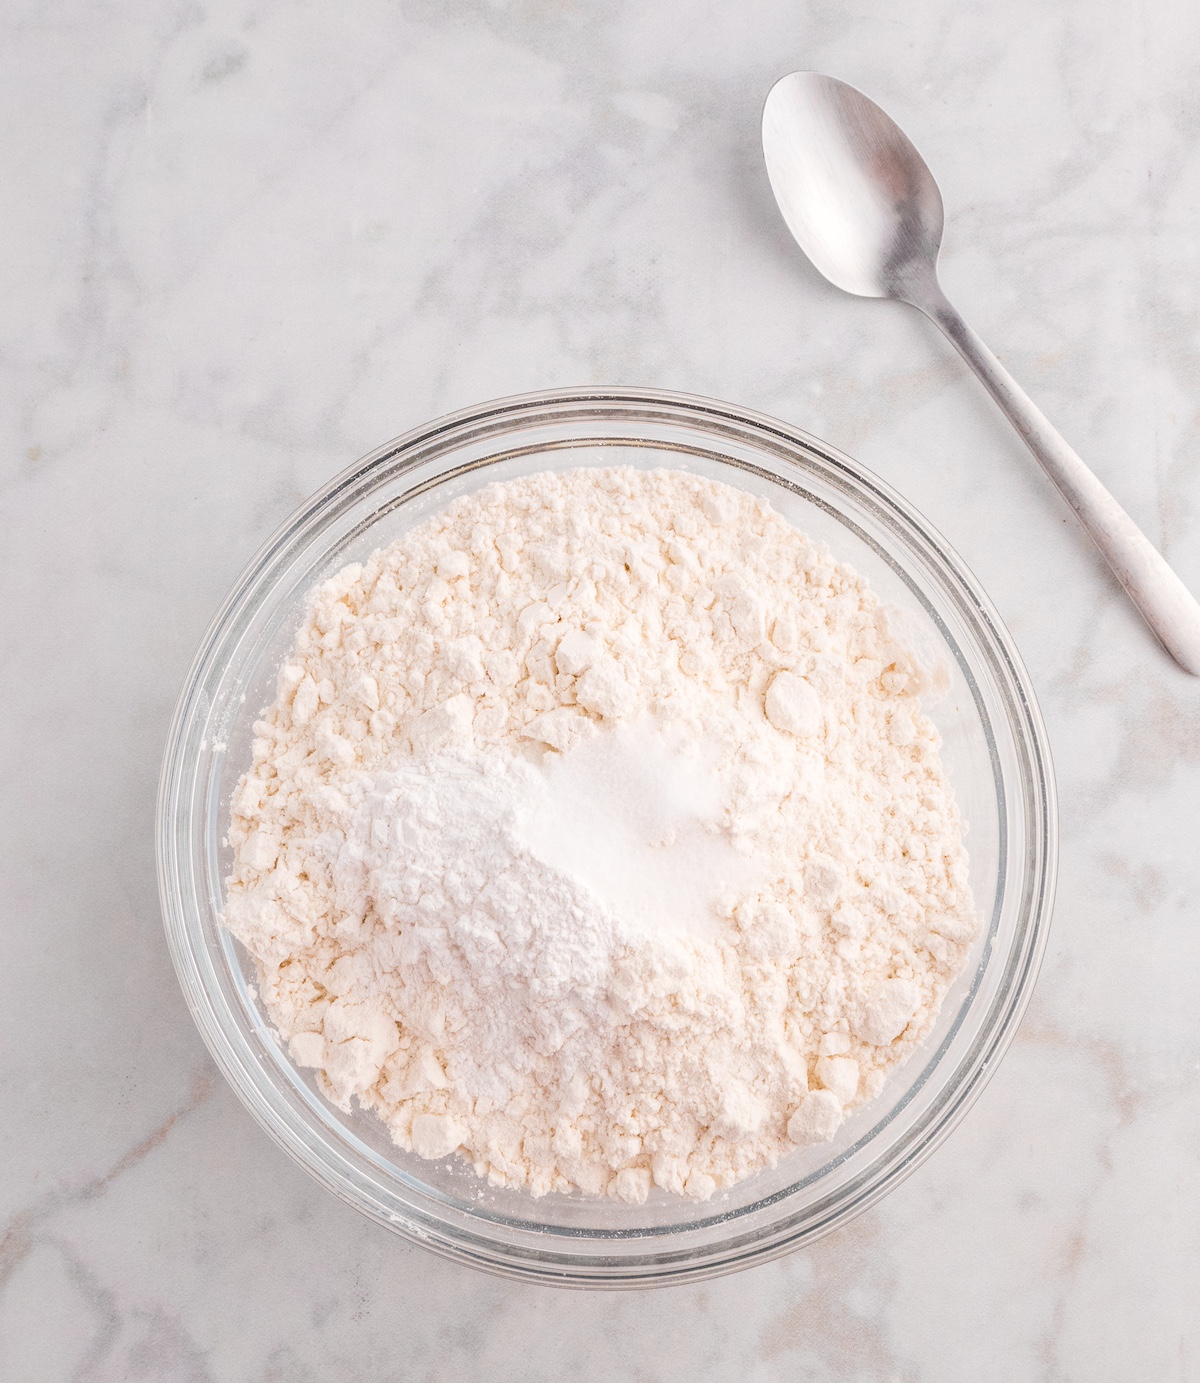 Whisk Flour, Baking Powder, and Salt in a glass bowl